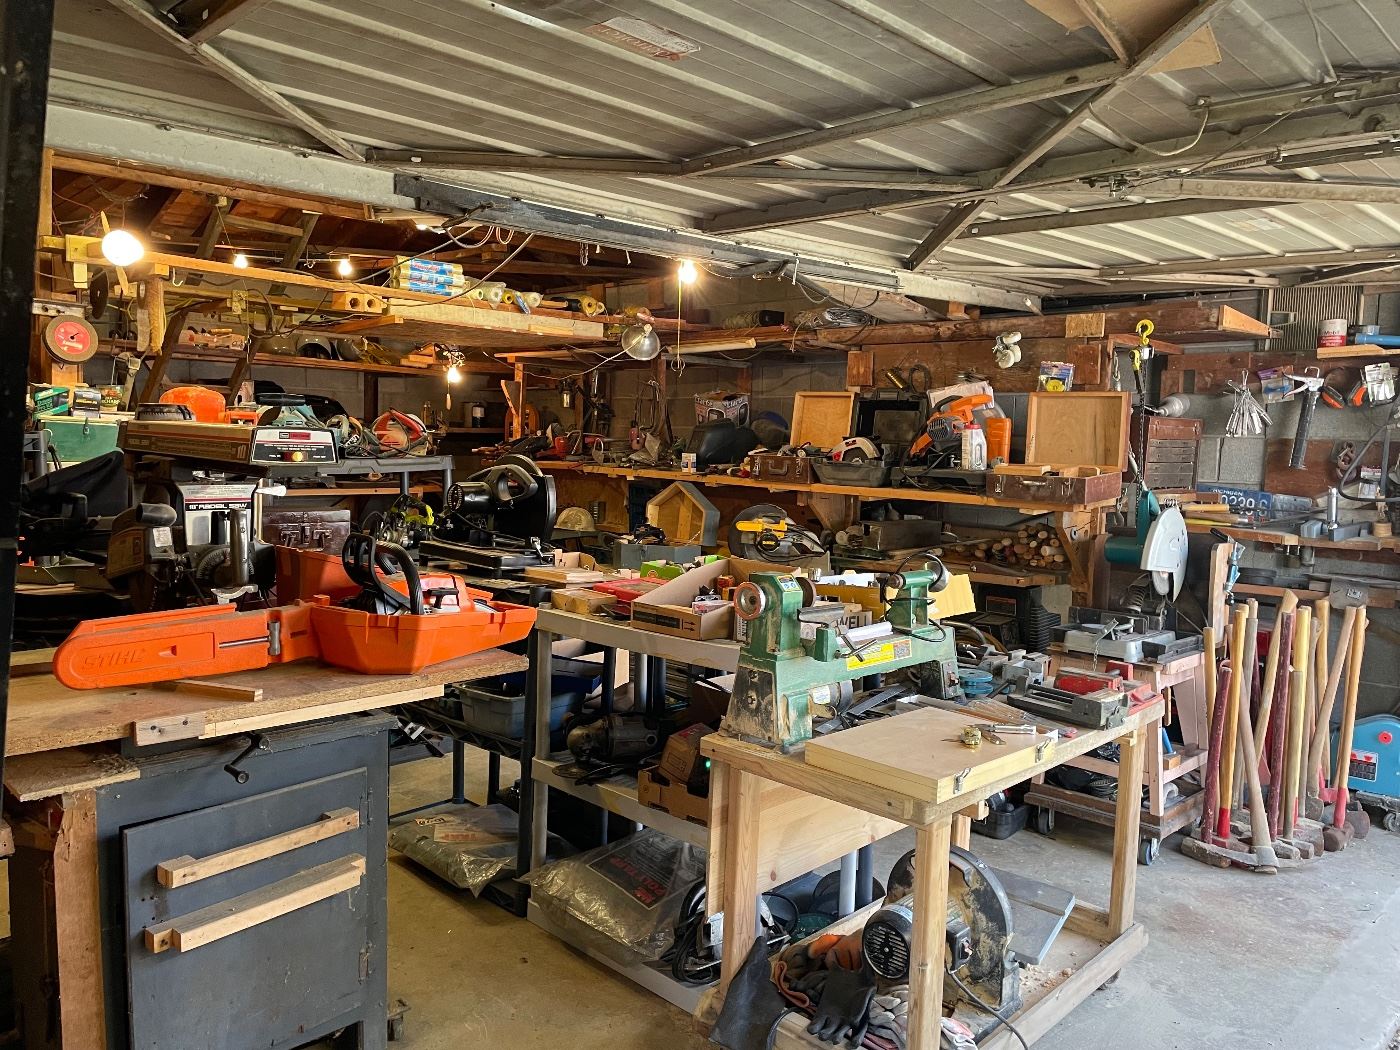 MARIO SATANI'S PRIDE AND JOY WORKING IN HIS GARAGE!!                                                                                                                   COME BROWSE HIS TREASURED TOOLS AND SEE WHAT YOU CAN ADD TO YOUR COLLECTION!